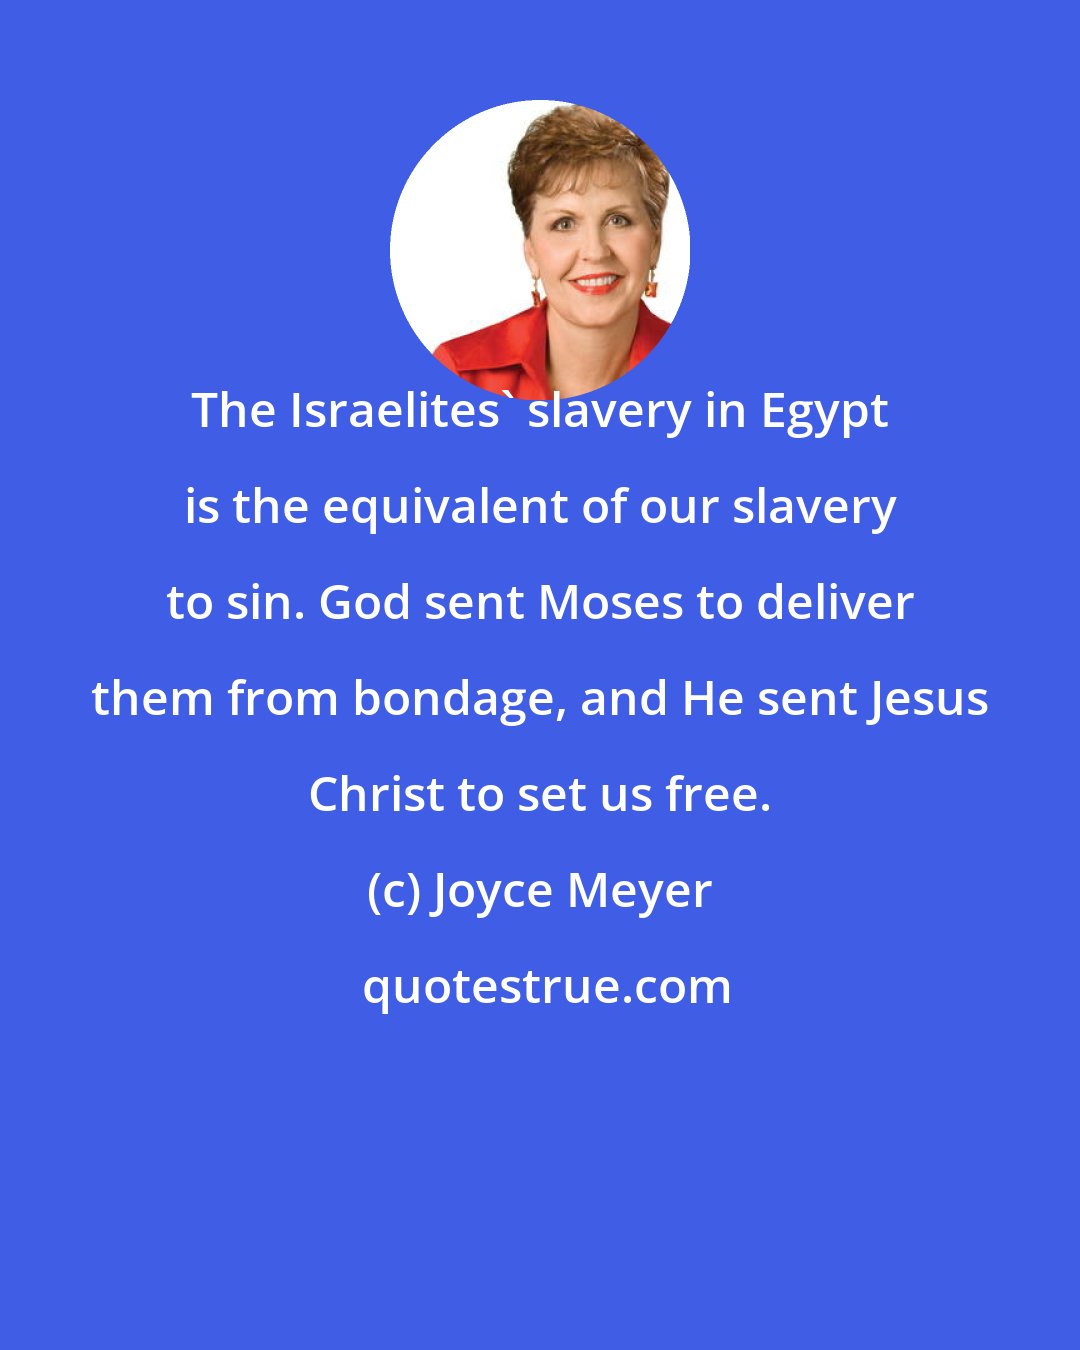 Joyce Meyer: The Israelites' slavery in Egypt is the equivalent of our slavery to sin. God sent Moses to deliver them from bondage, and He sent Jesus Christ to set us free.